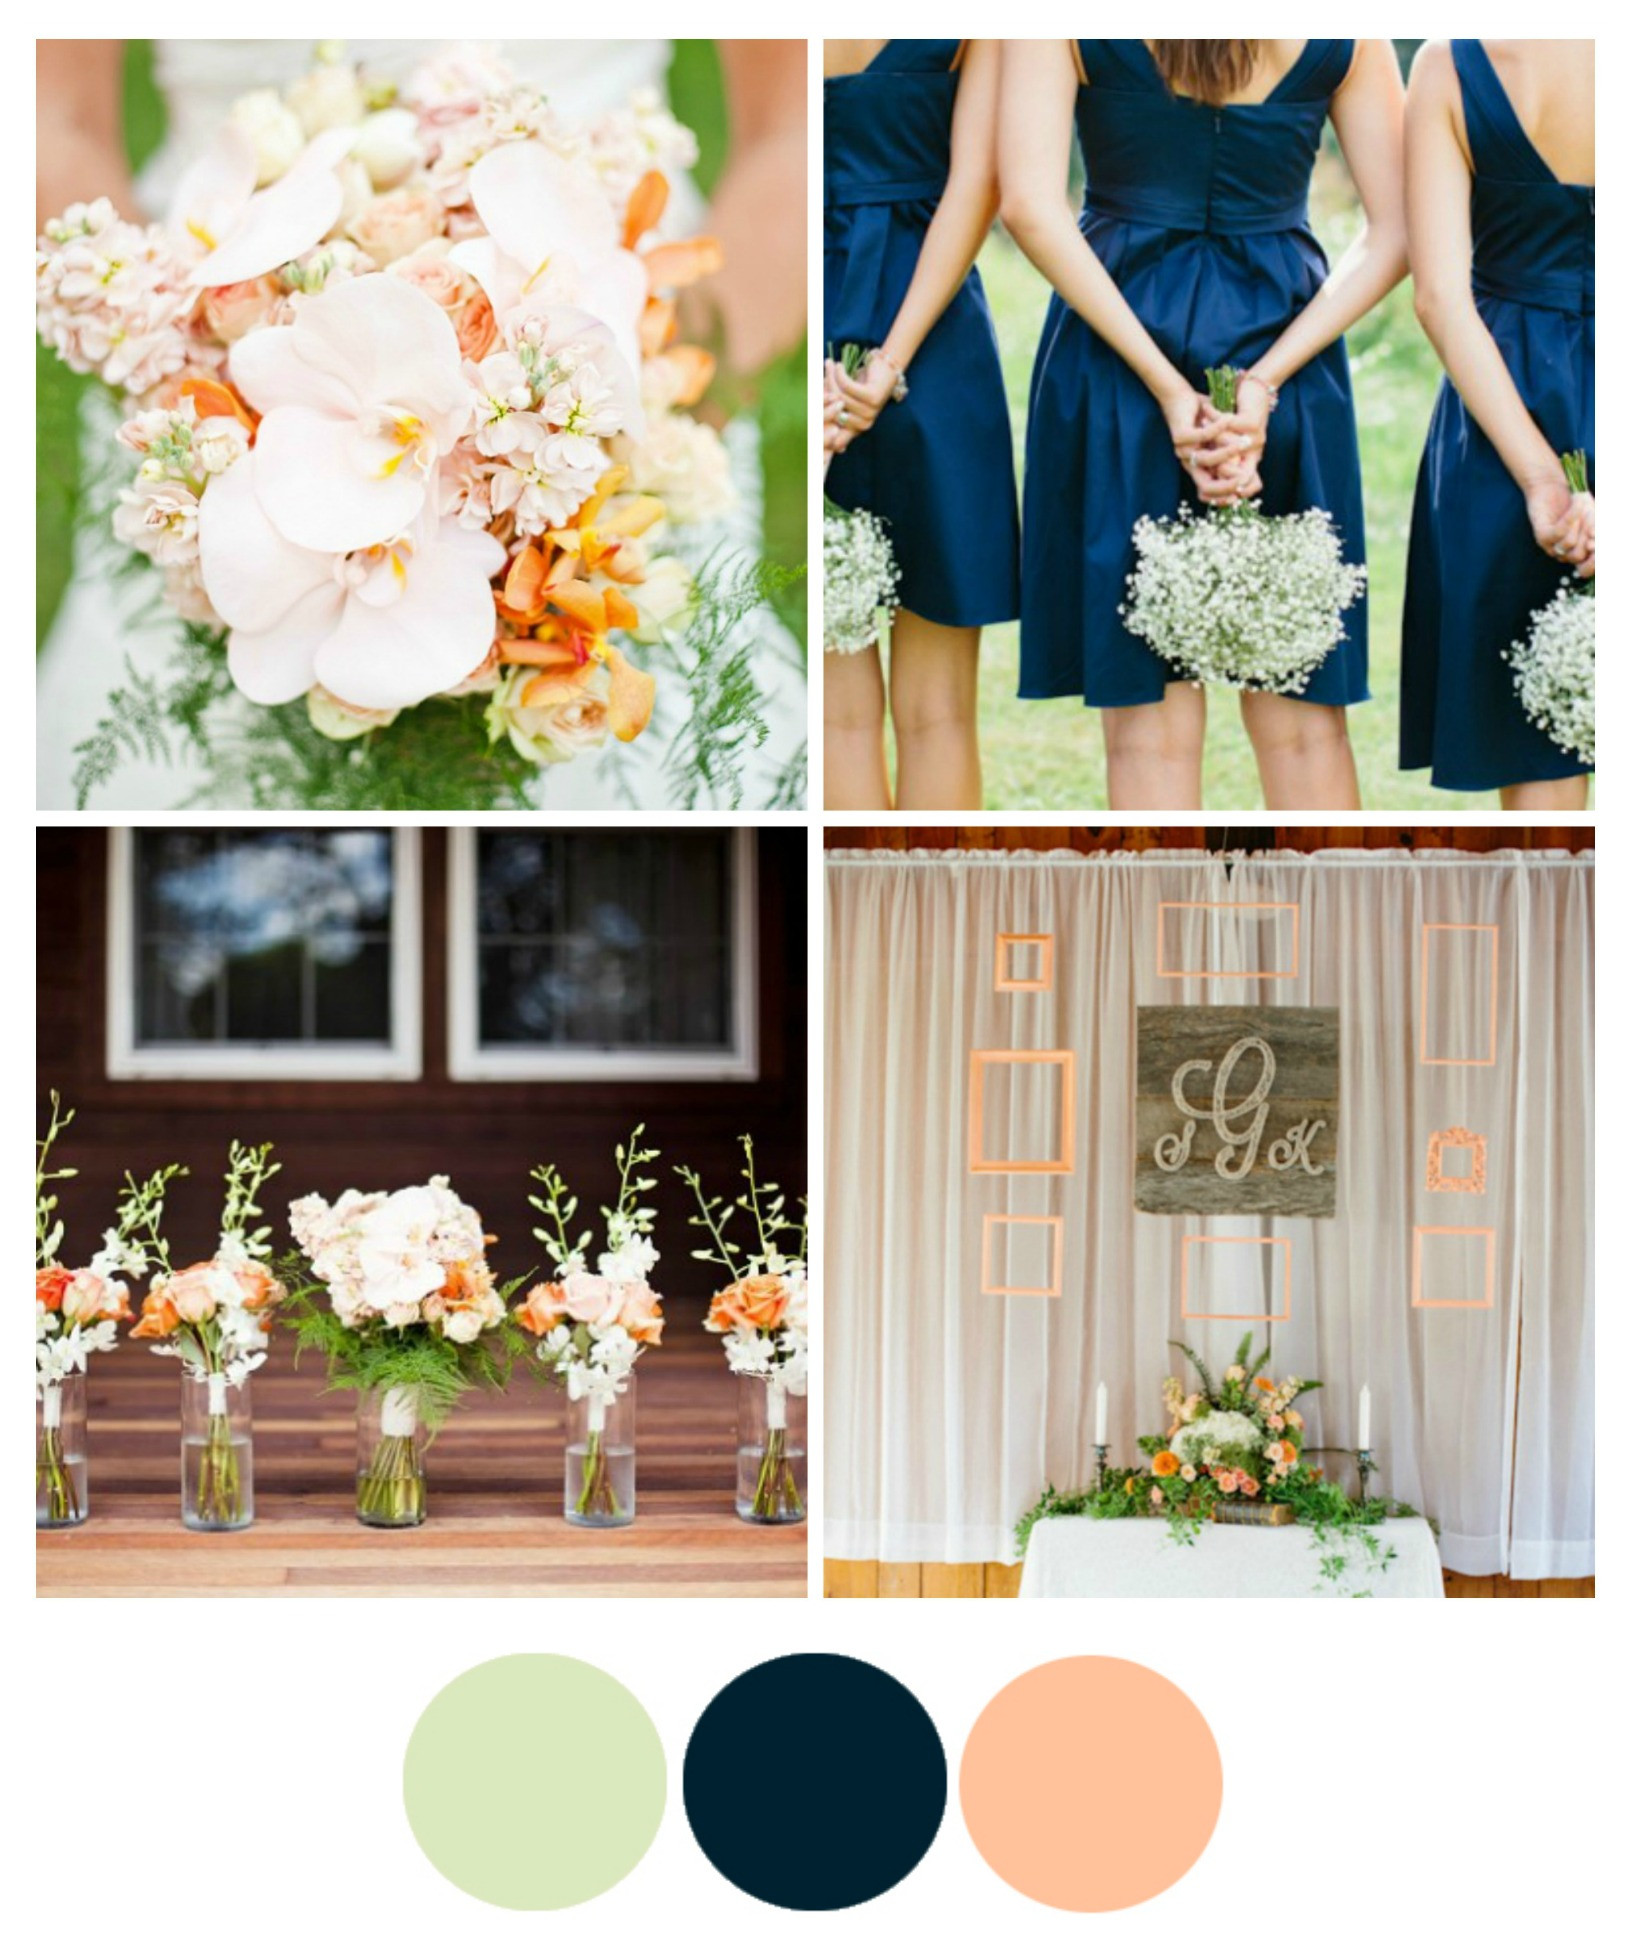 Rustic Wedding Color Schemes
 Wedding Color Inspiration Peach and Navy Rustic